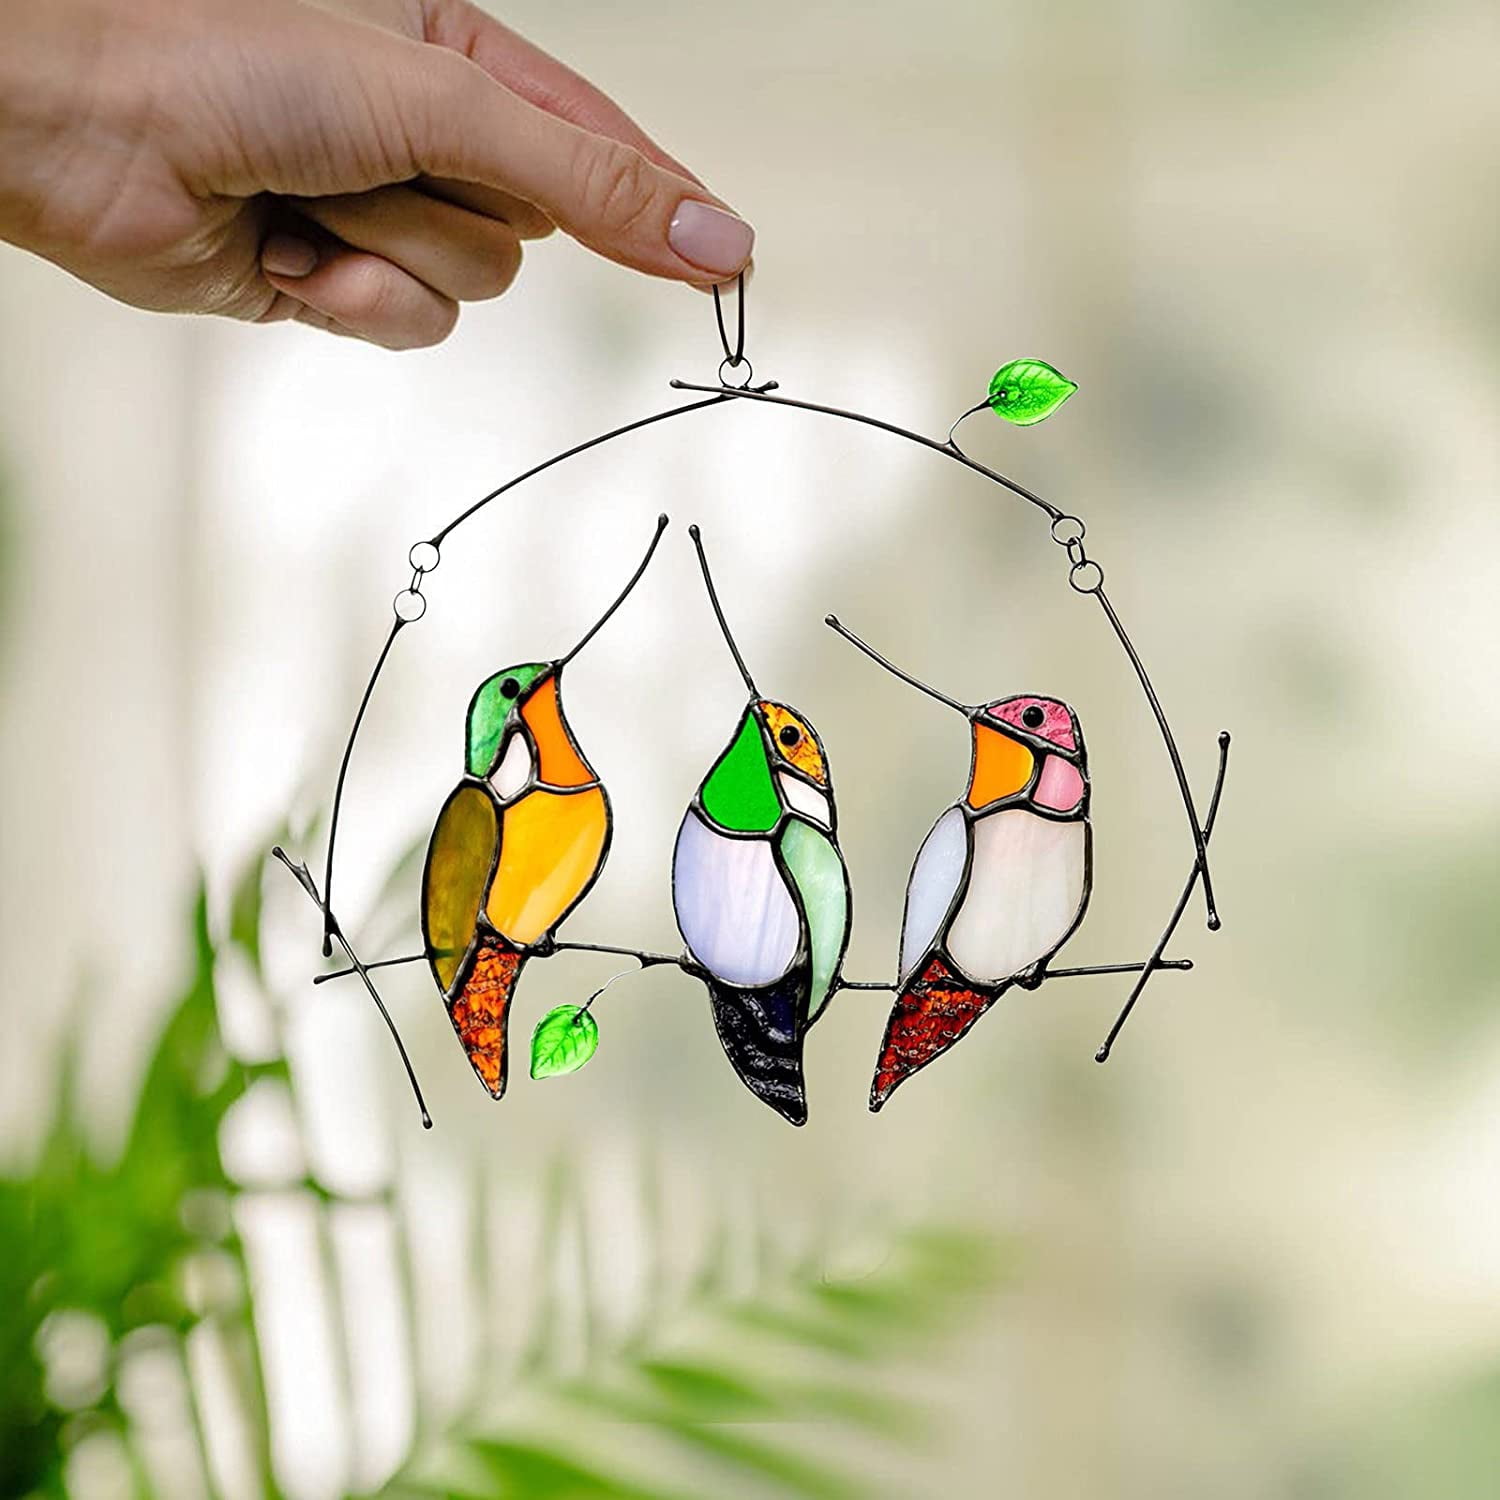 Bird Series Ornaments Pendant Home Decoration for Bird Lover Multicolor Birds On A Wire High Stained Glass Suncatcher Window Panel Birds Stained Glass Window Hangings 7 Birds 